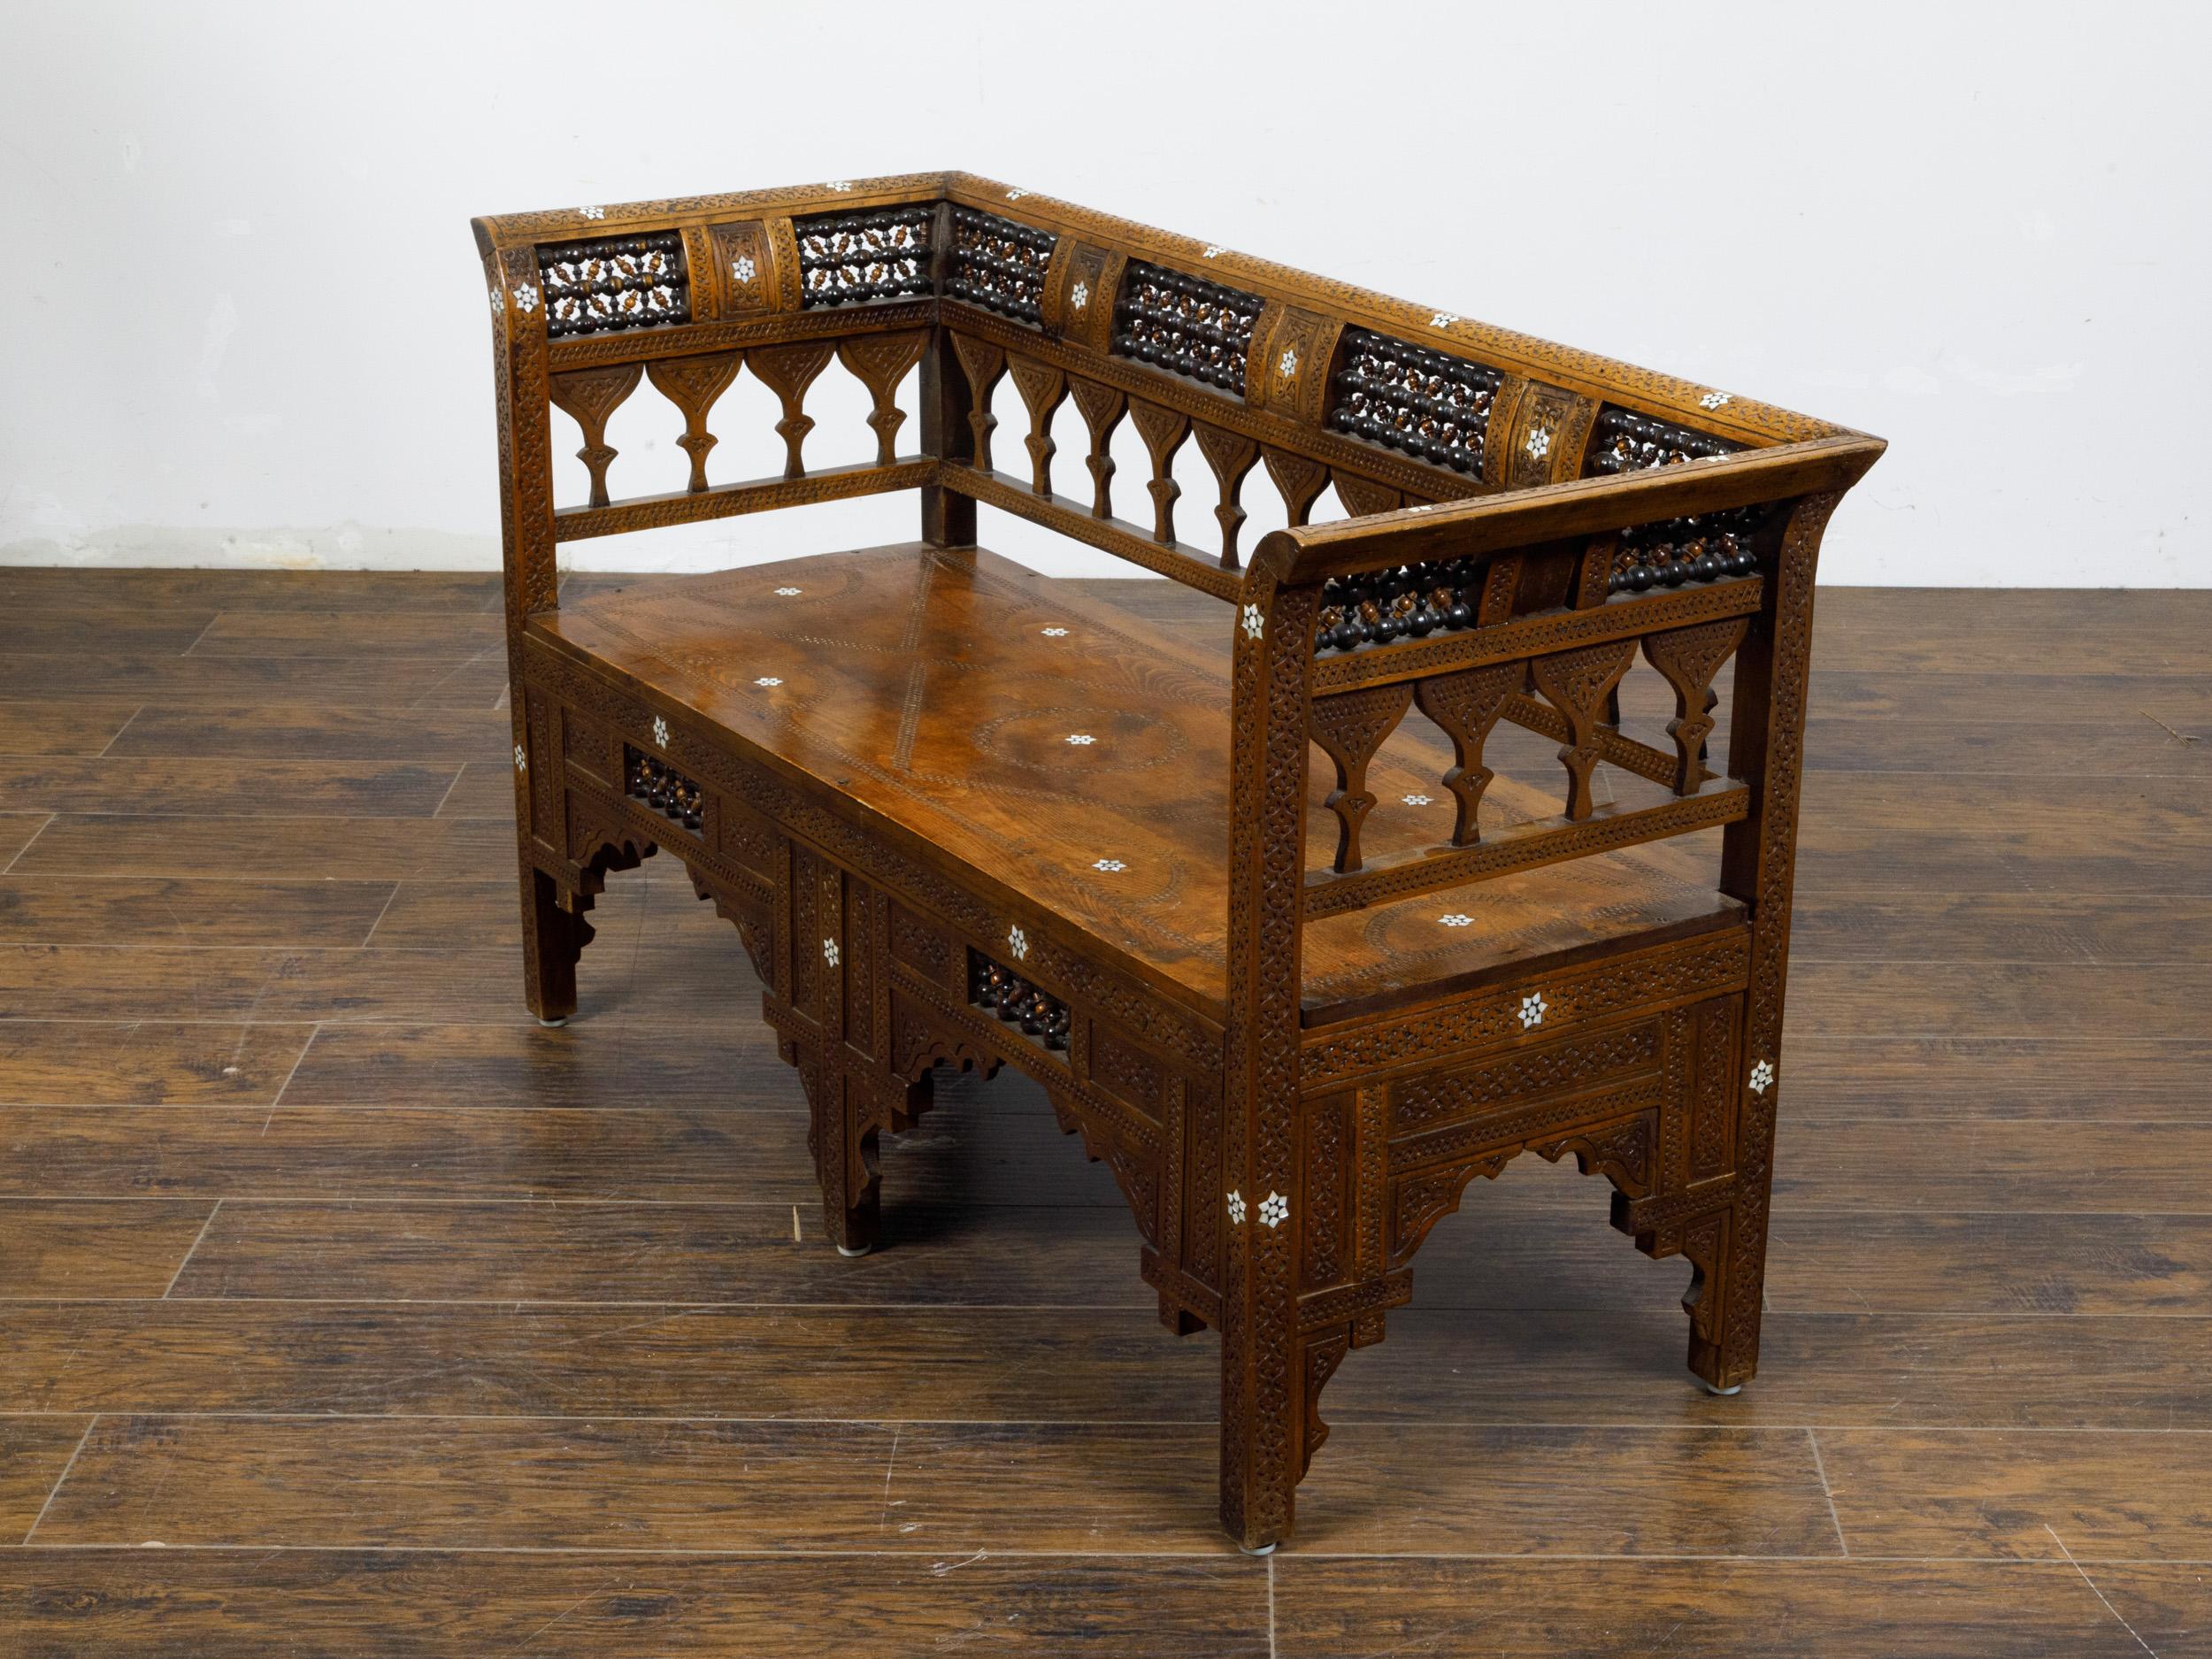 A Moroccan wooden bench with arched backrest, latticework and mother-of-pearl star inlay. This Moroccan wooden bench, dating back to circa 1900, exudes a sense of traditional elegance and intricate craftsmanship. It features a beautifully arched